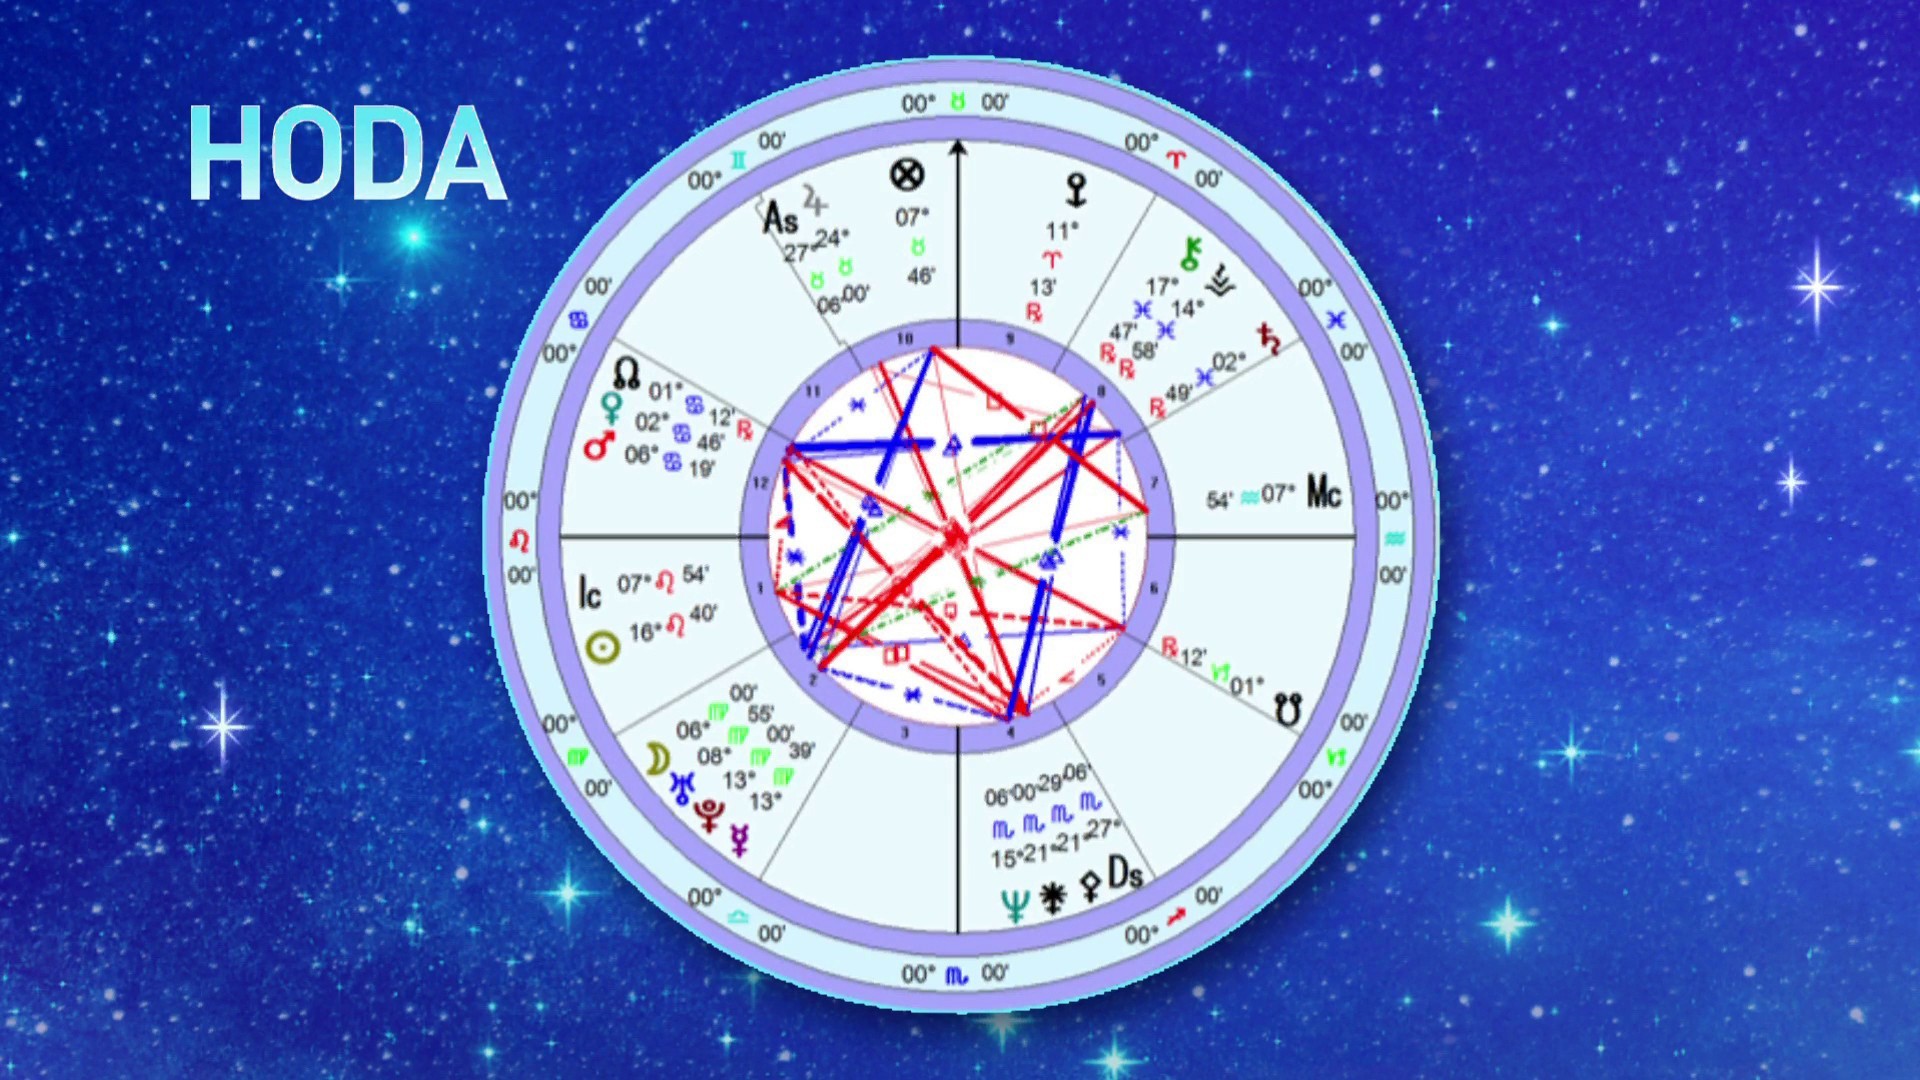 March 2023 Horoscopes - How Each Zodiac Sign Will Be Affected